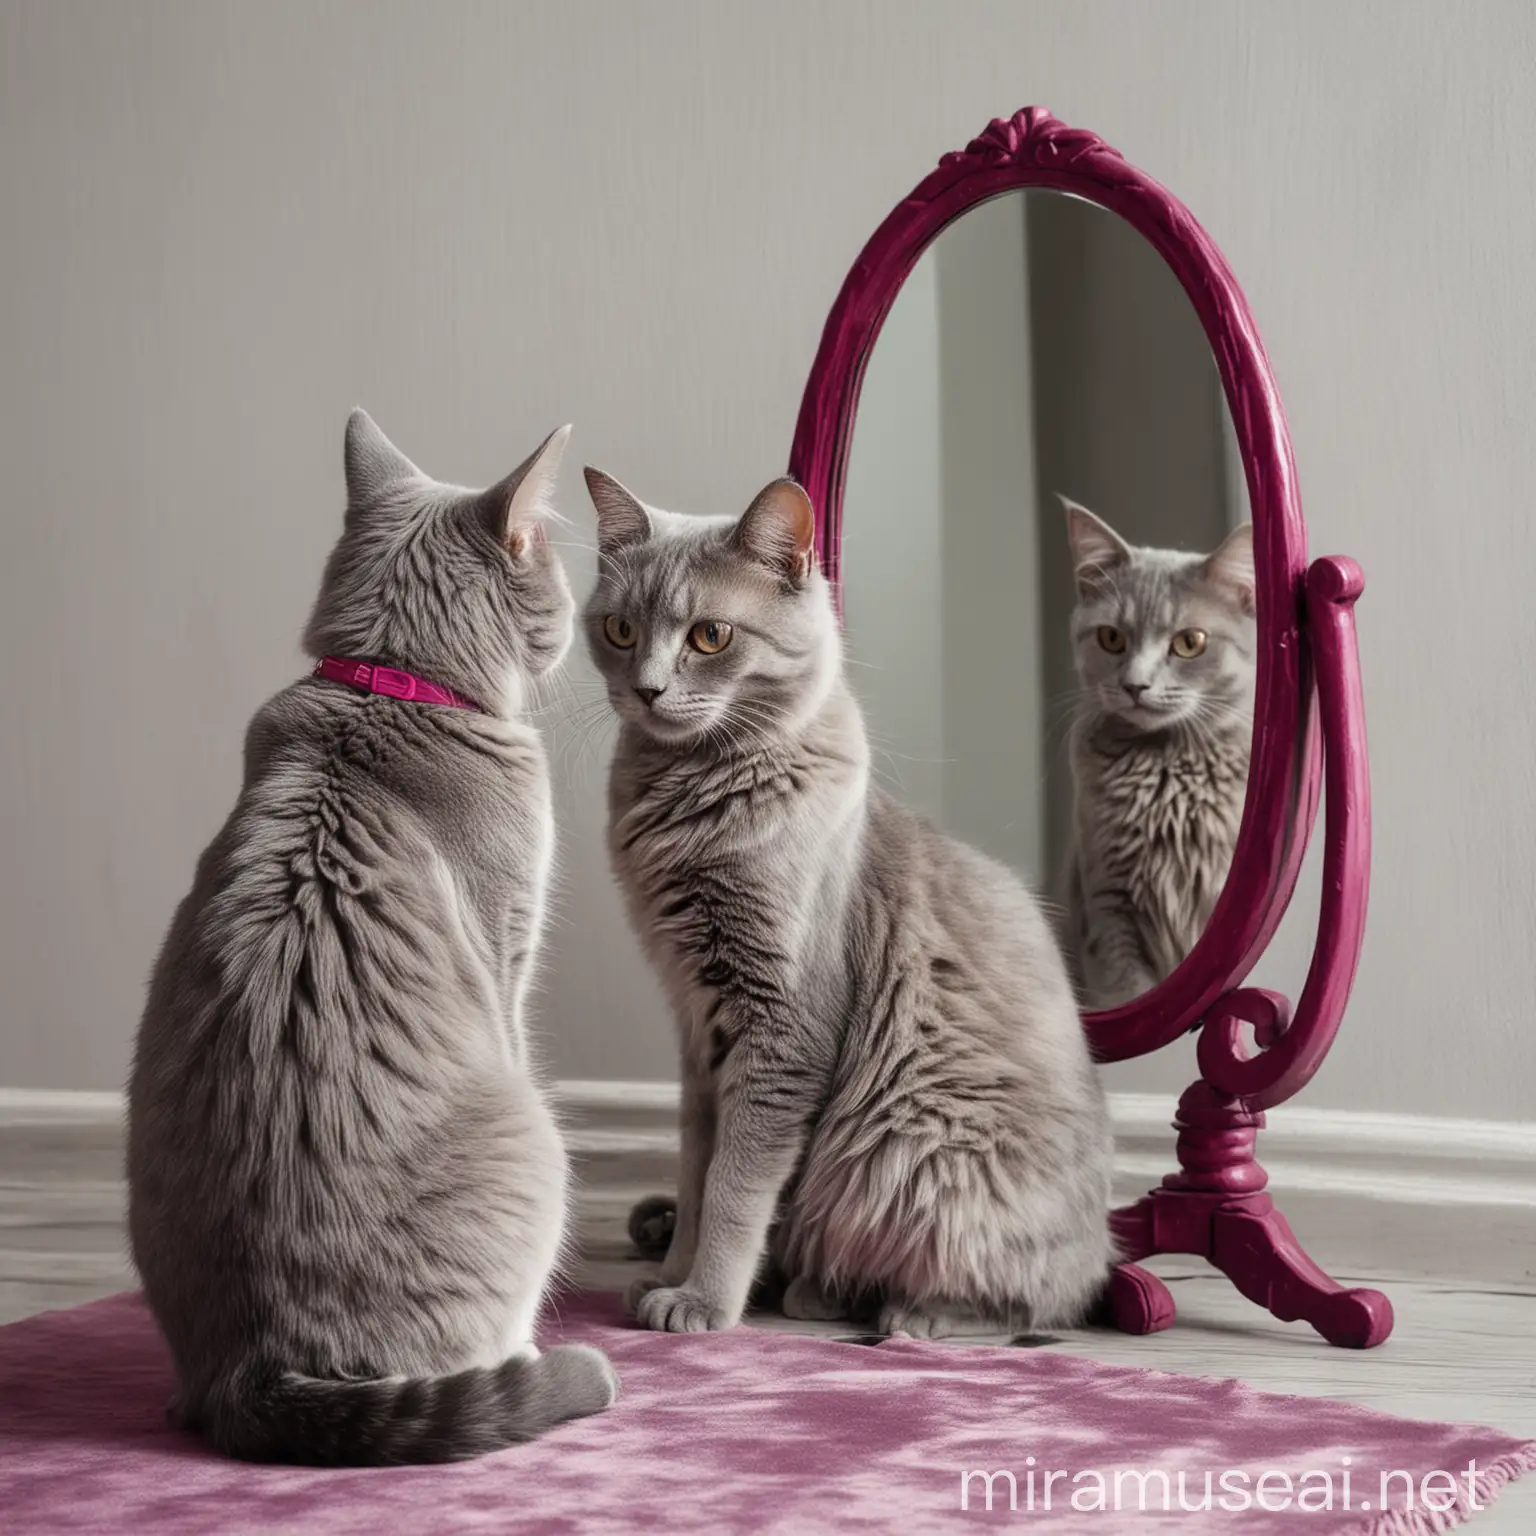 Cat Watching Reflection in Magenta and Gray Setting